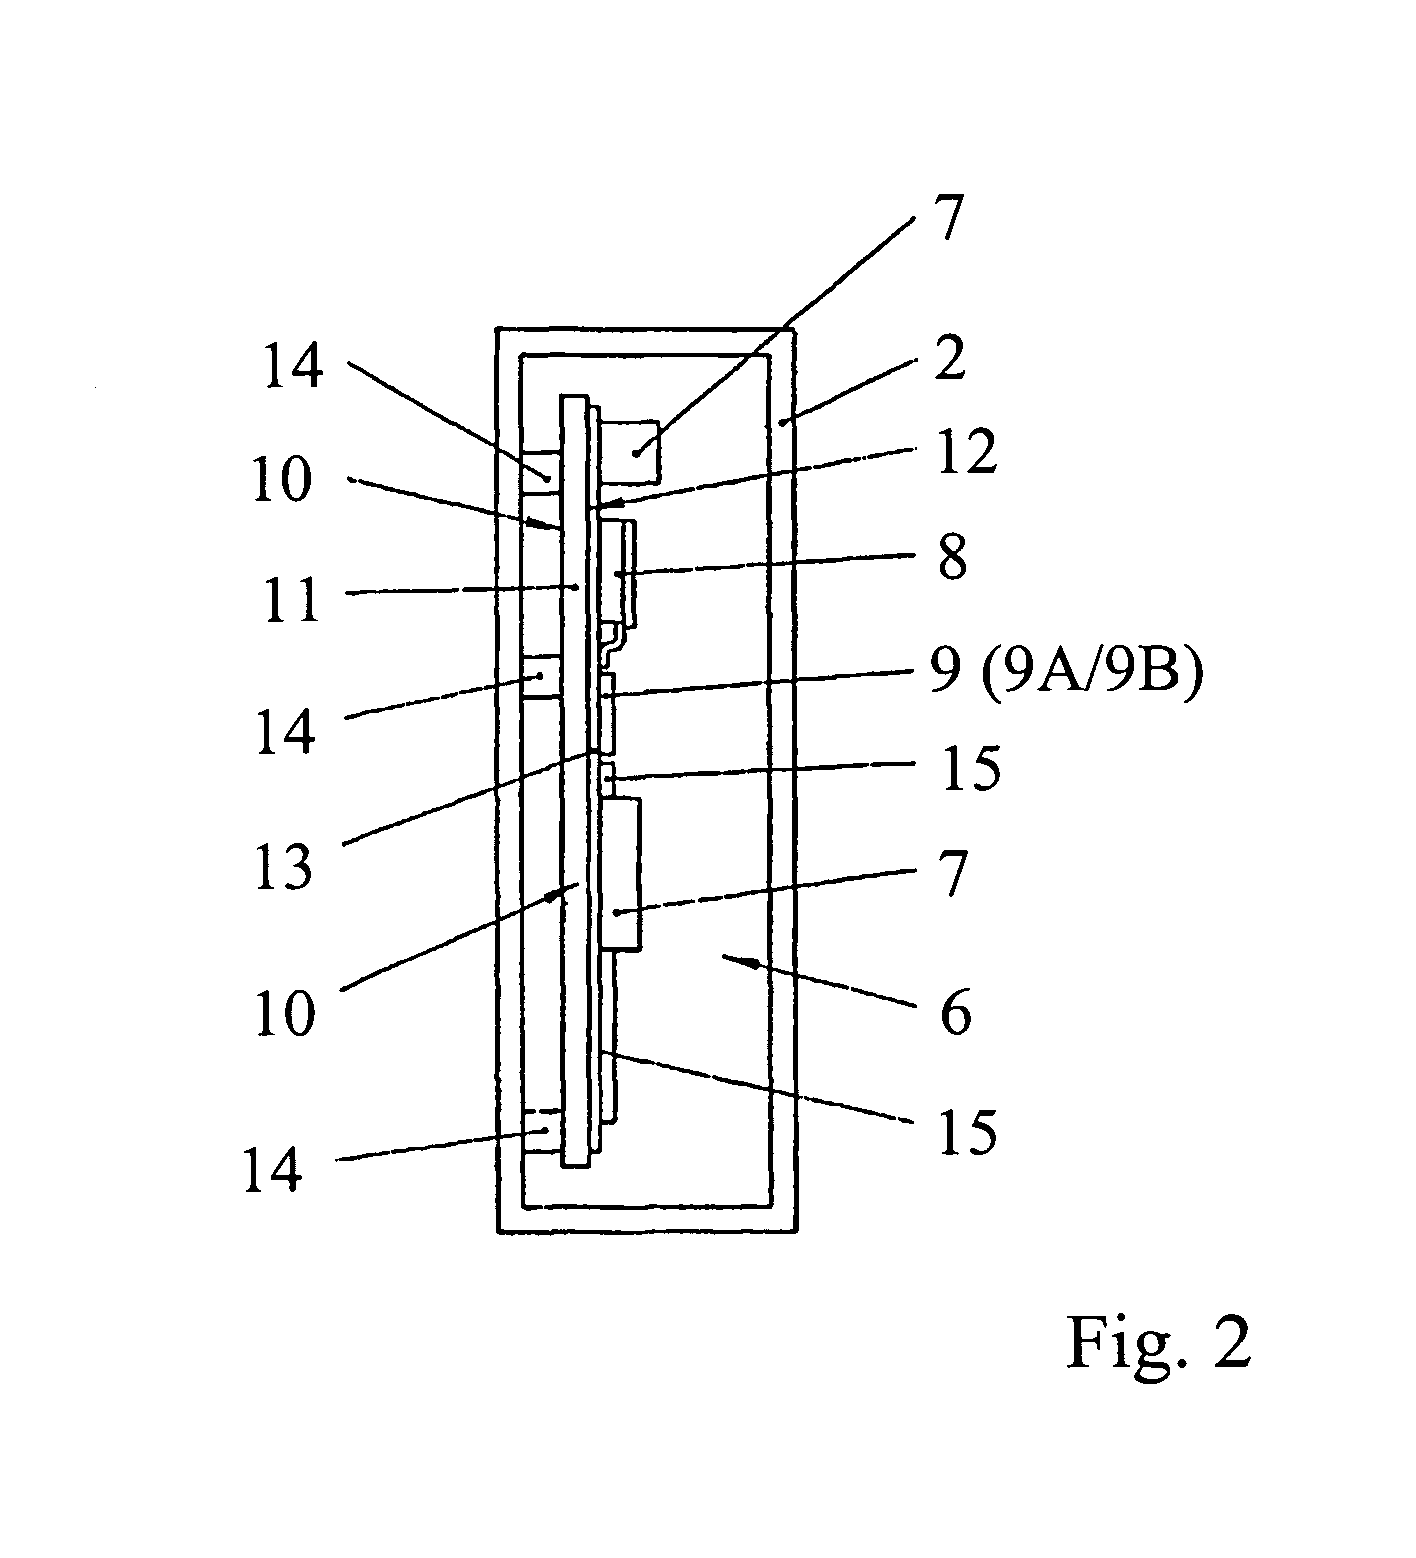 Electrical circuit arrangement for a power tool